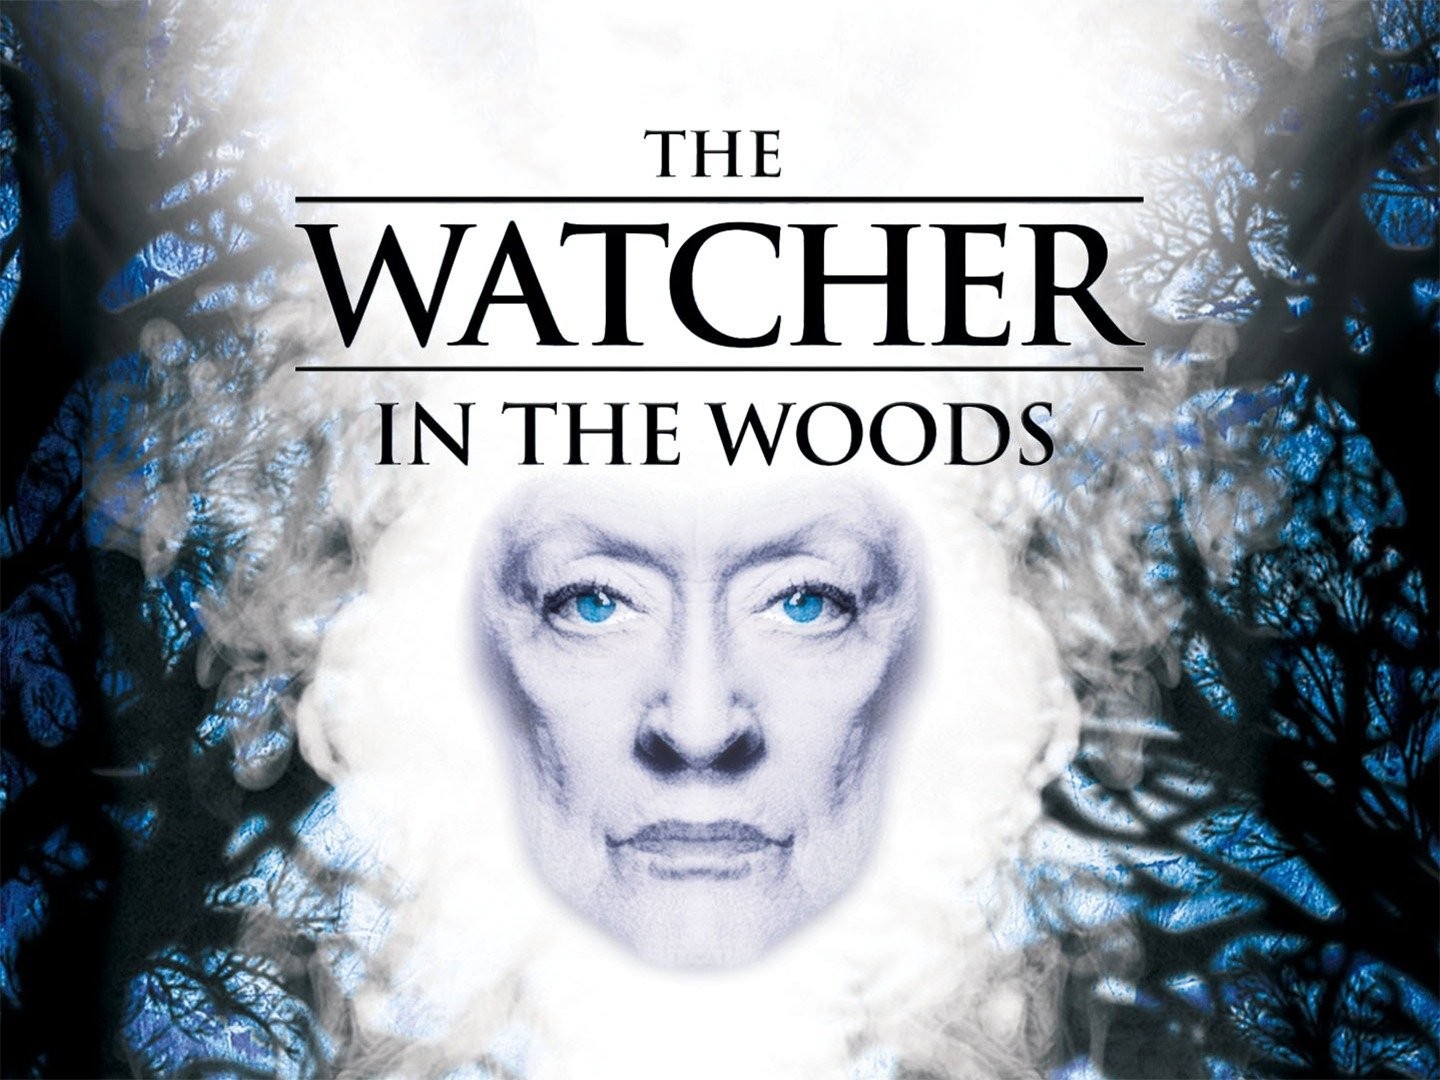 The Watcher in the Woods (DVD) - Very Good Condition 31398283706